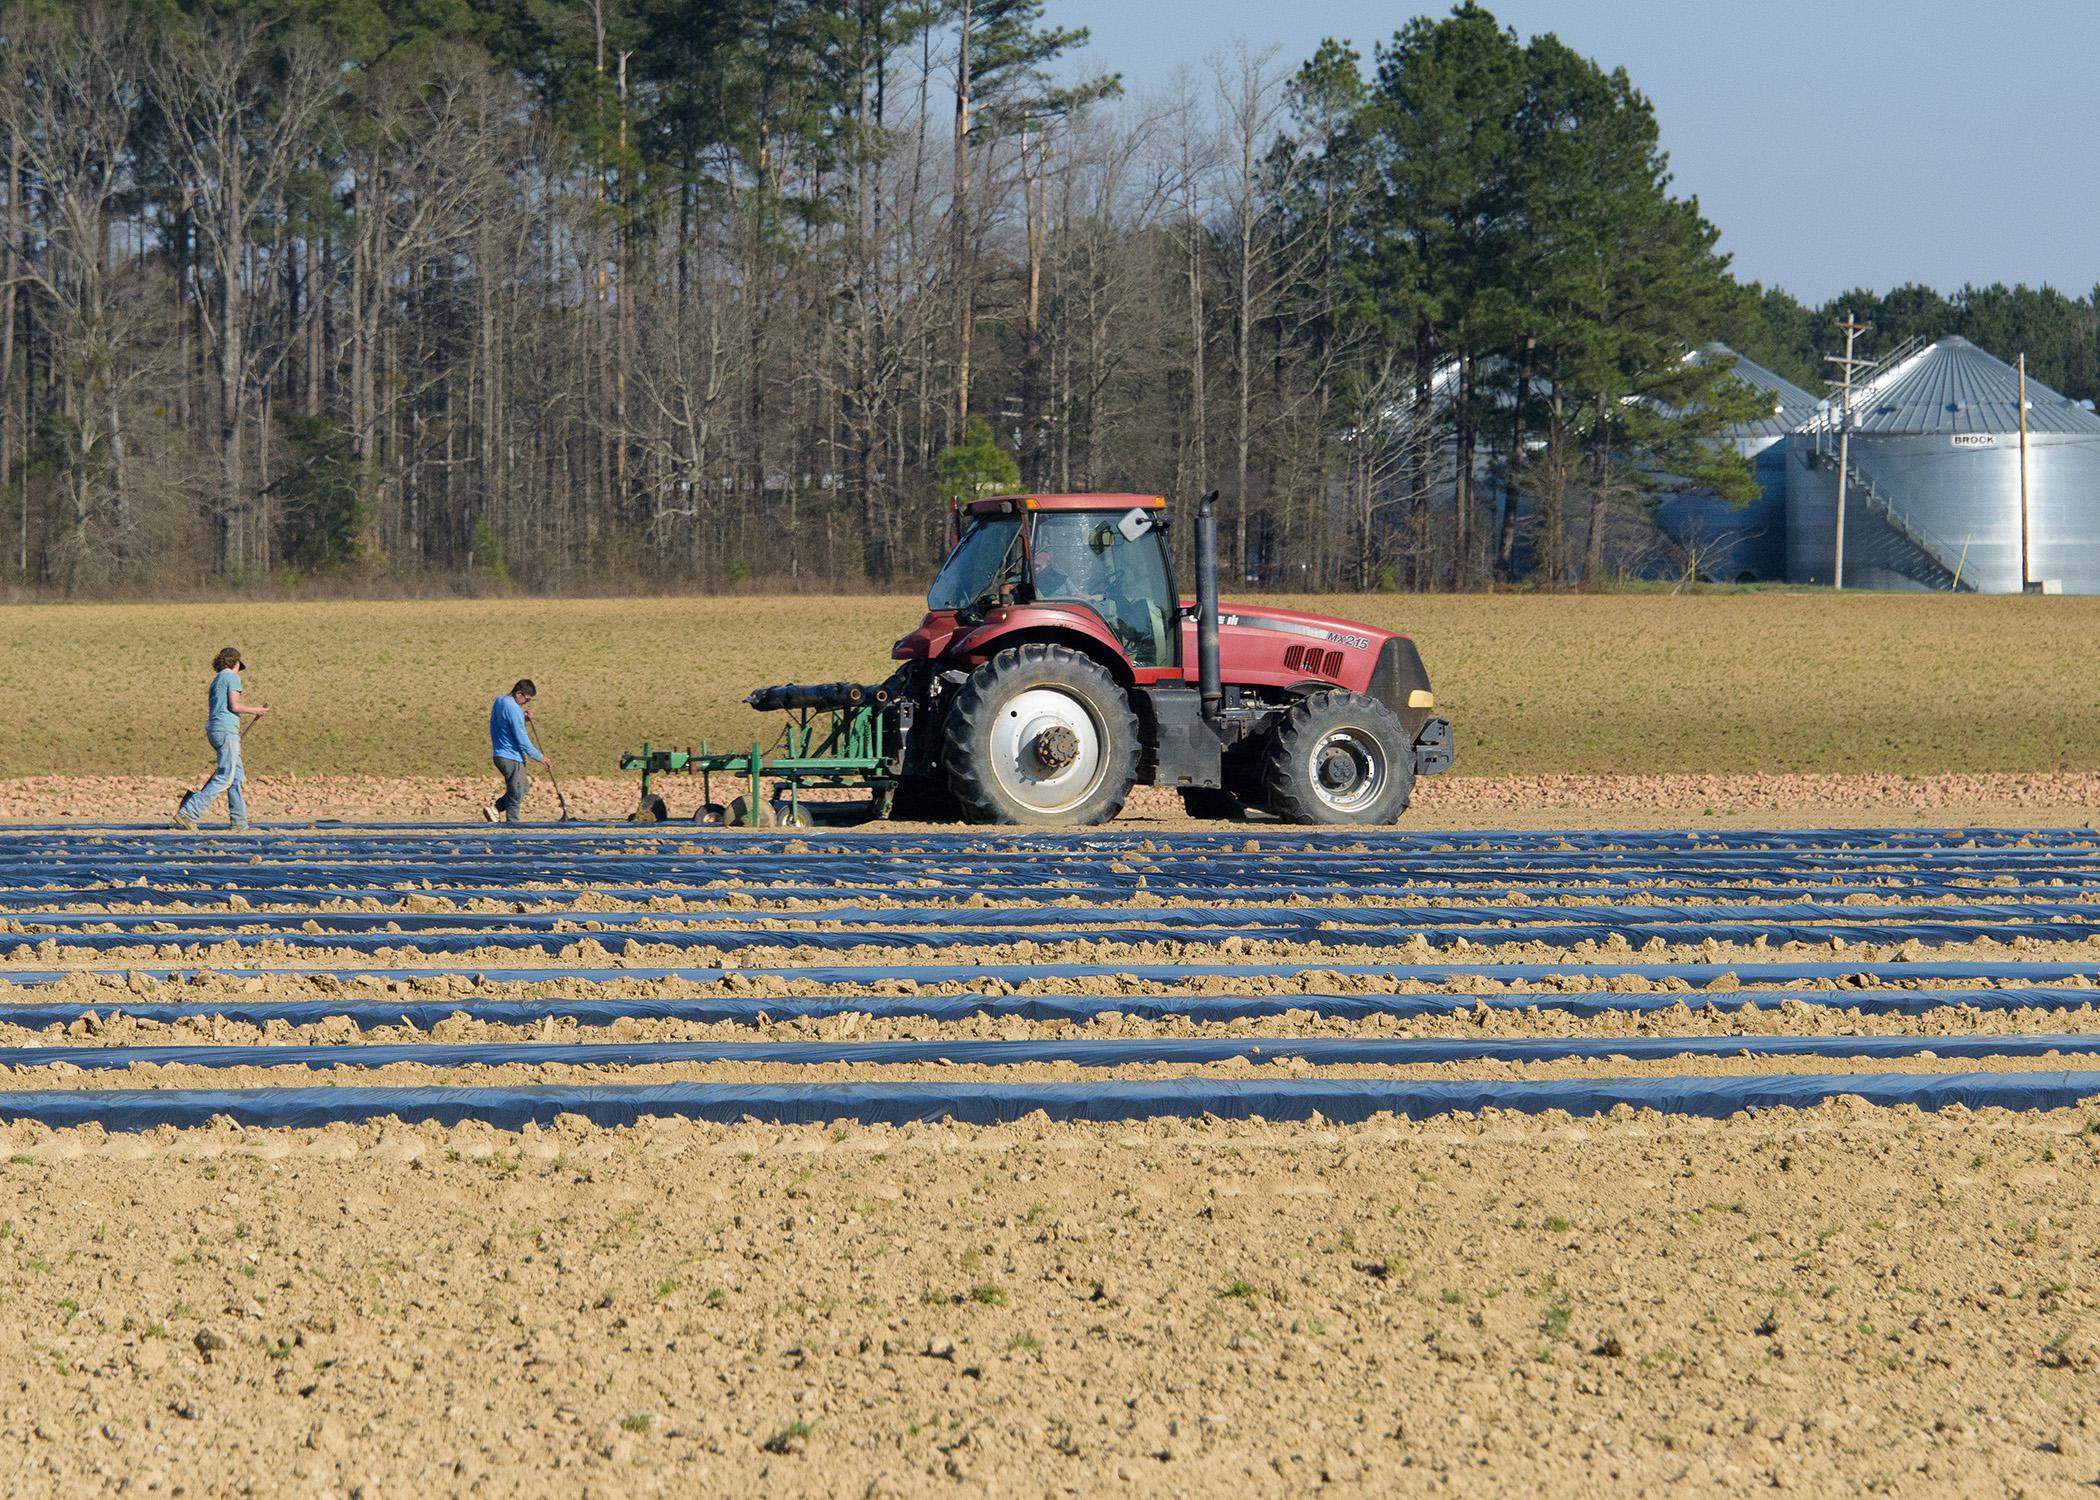 Two workers walk behind a red tractor in a field.